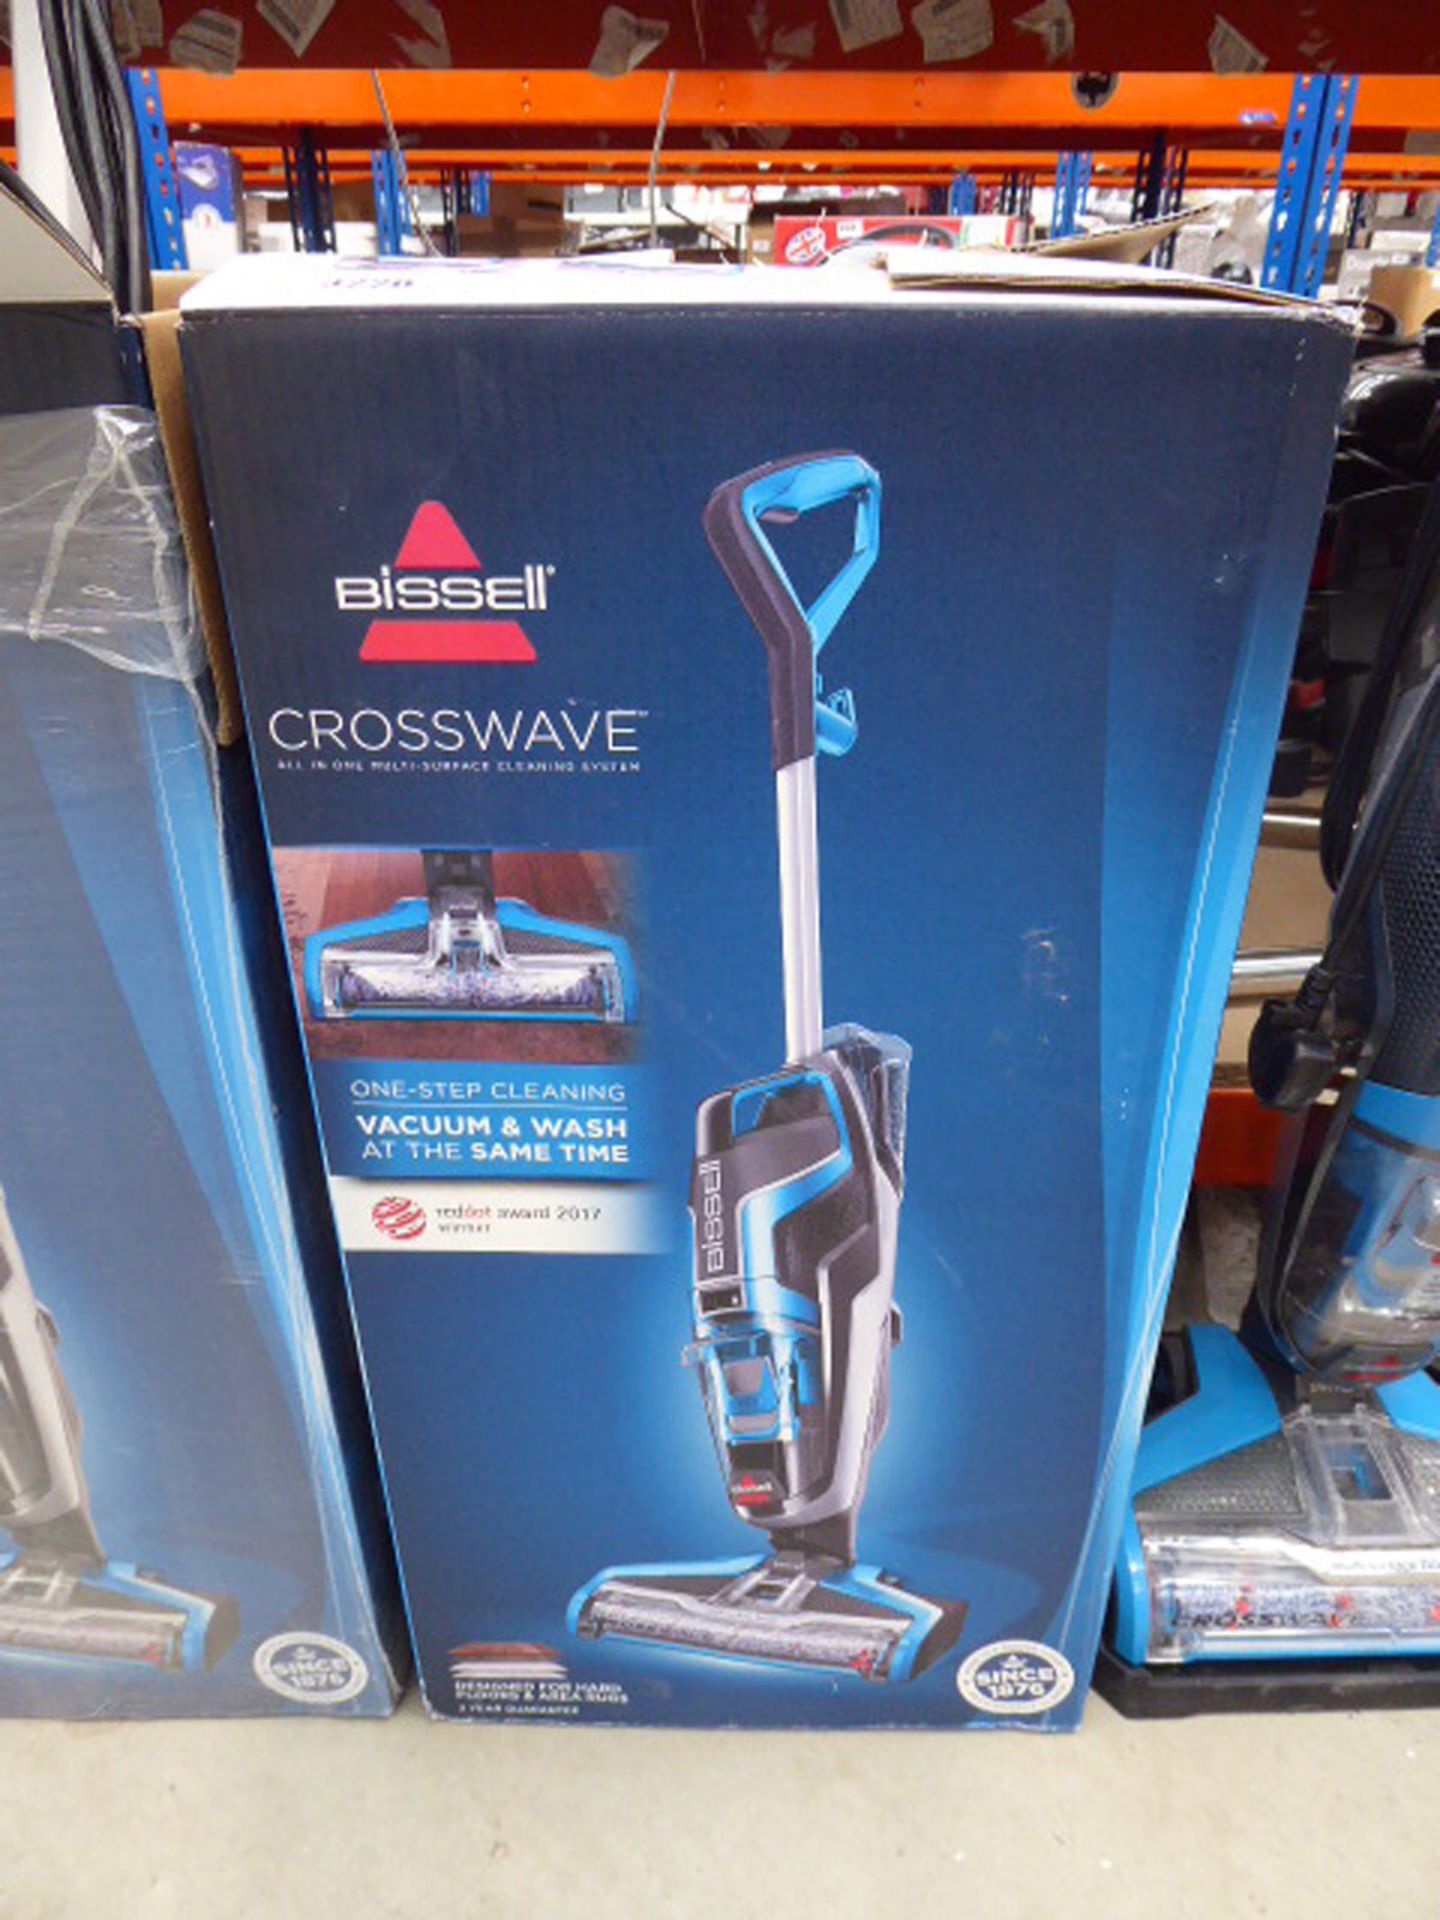 132 Bissell crosswave all in one multi surface cleaning system with box